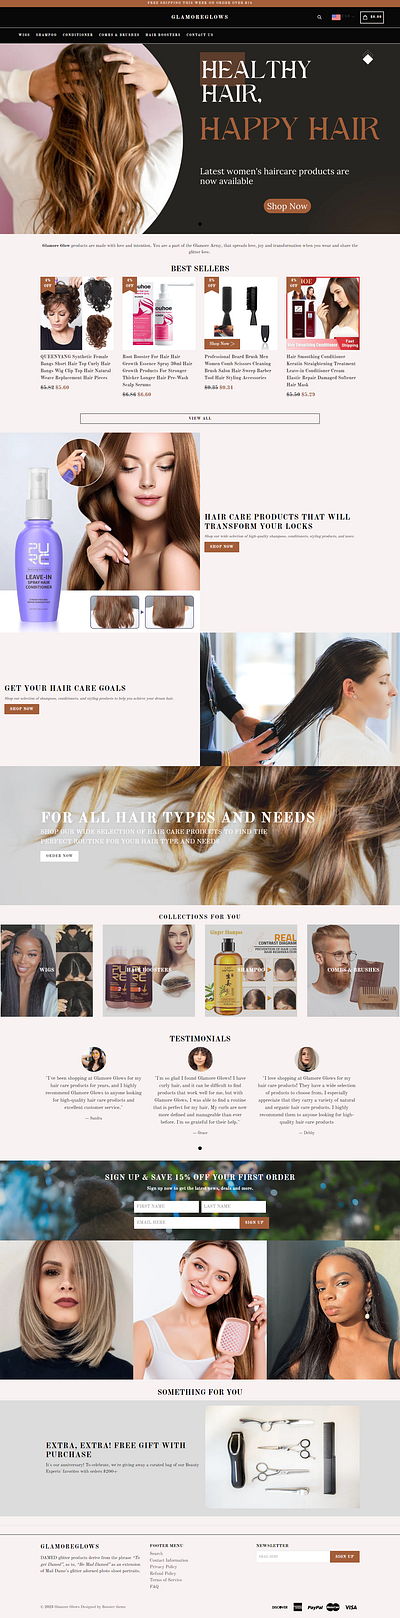 Hair Care Products Ecommerce store dropshipping store ecommerce payment intergration ecommerce store ecommerce store setup hair care store mobile responsive shopify store online store shopify shopify apps intergration shopify dropshipping shopify dropshipping store shopify store